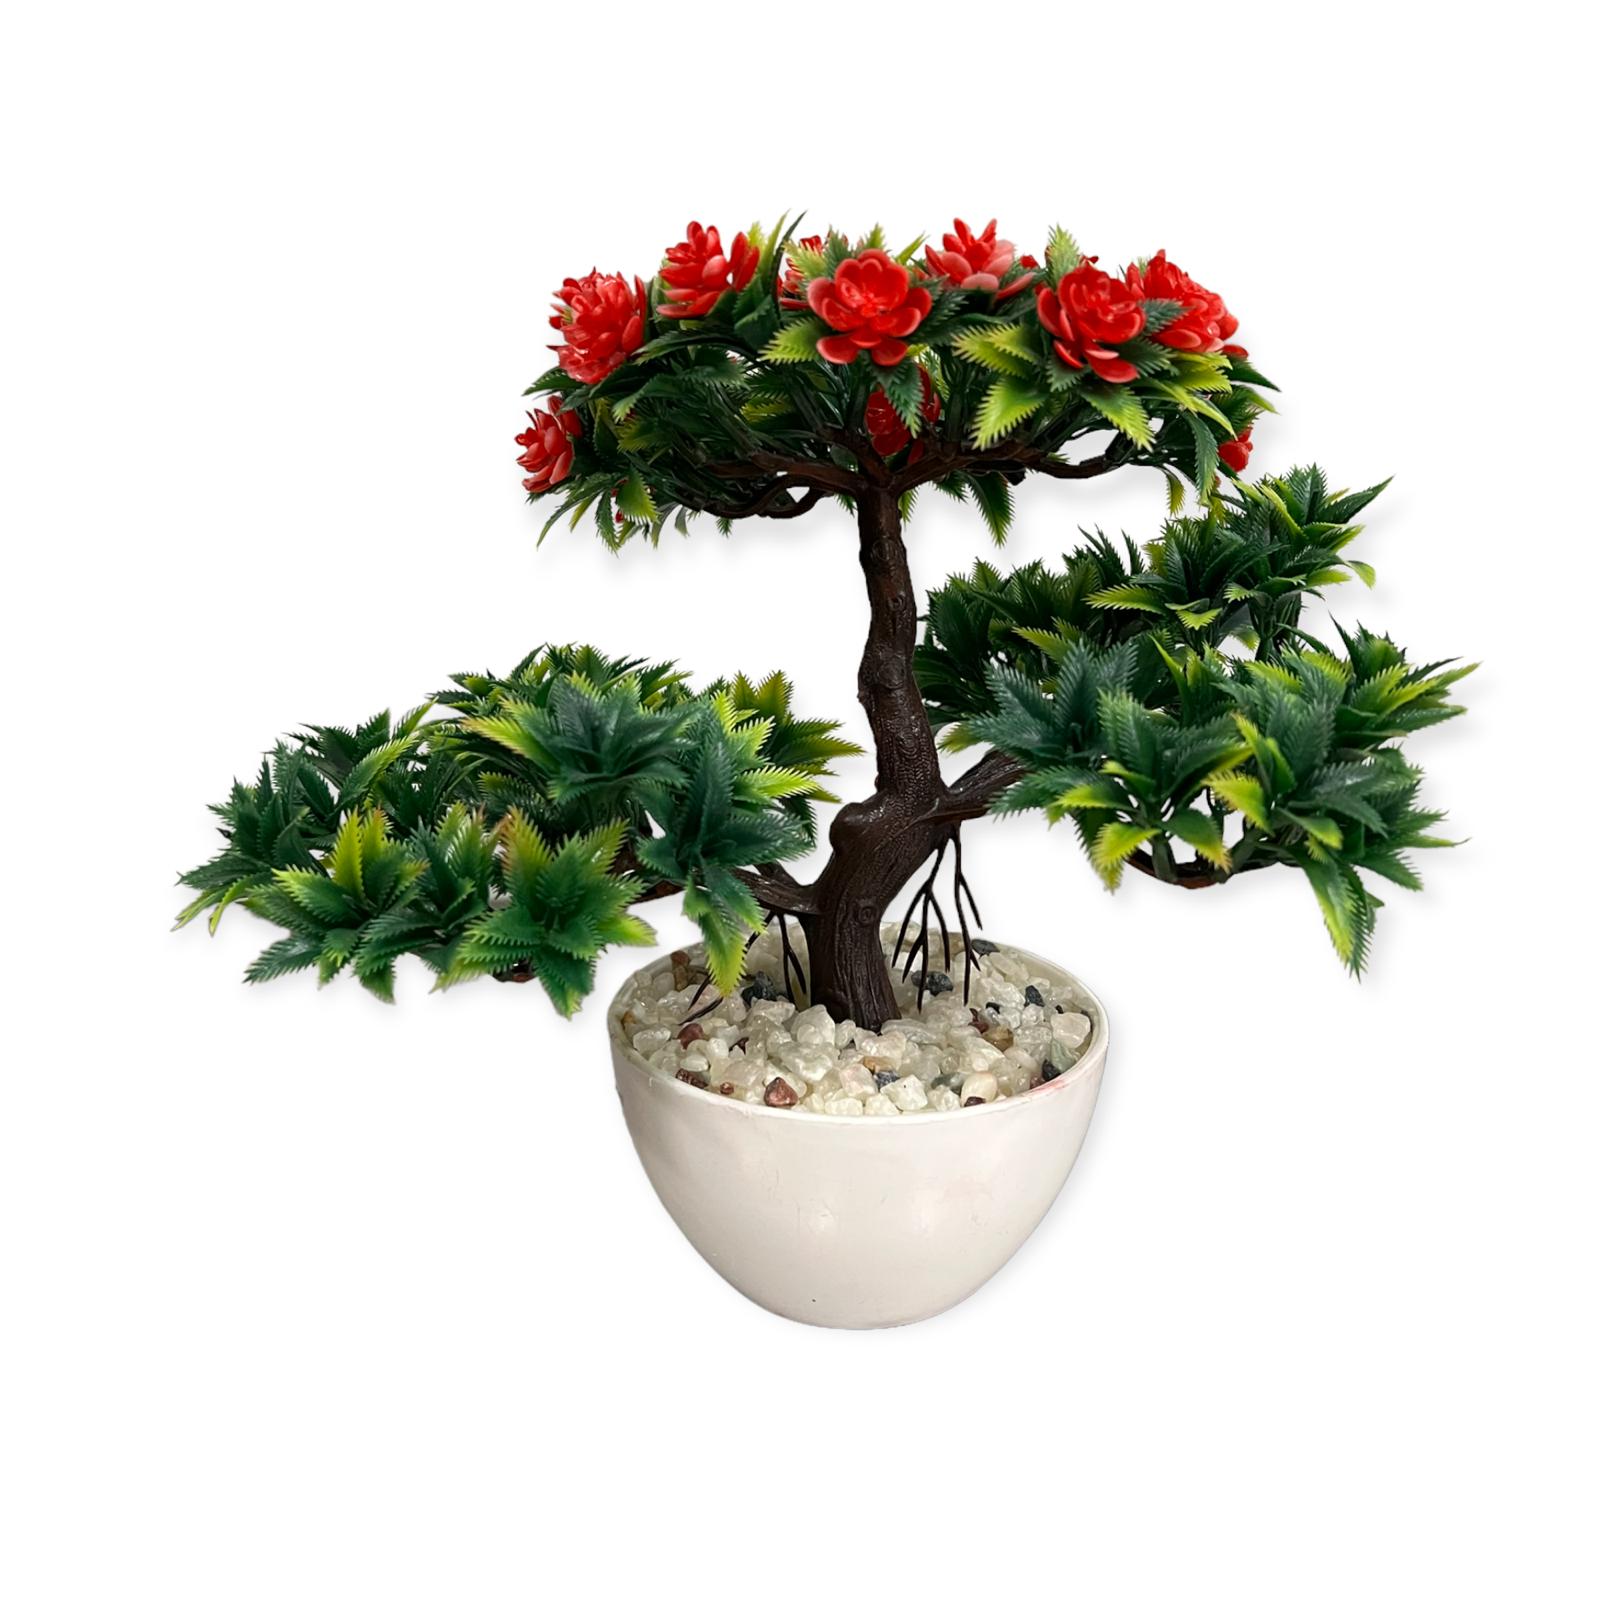 Artificial : Bonsai with Different Colored Flowers Online on Sale from HnG Nursery for trees & plants